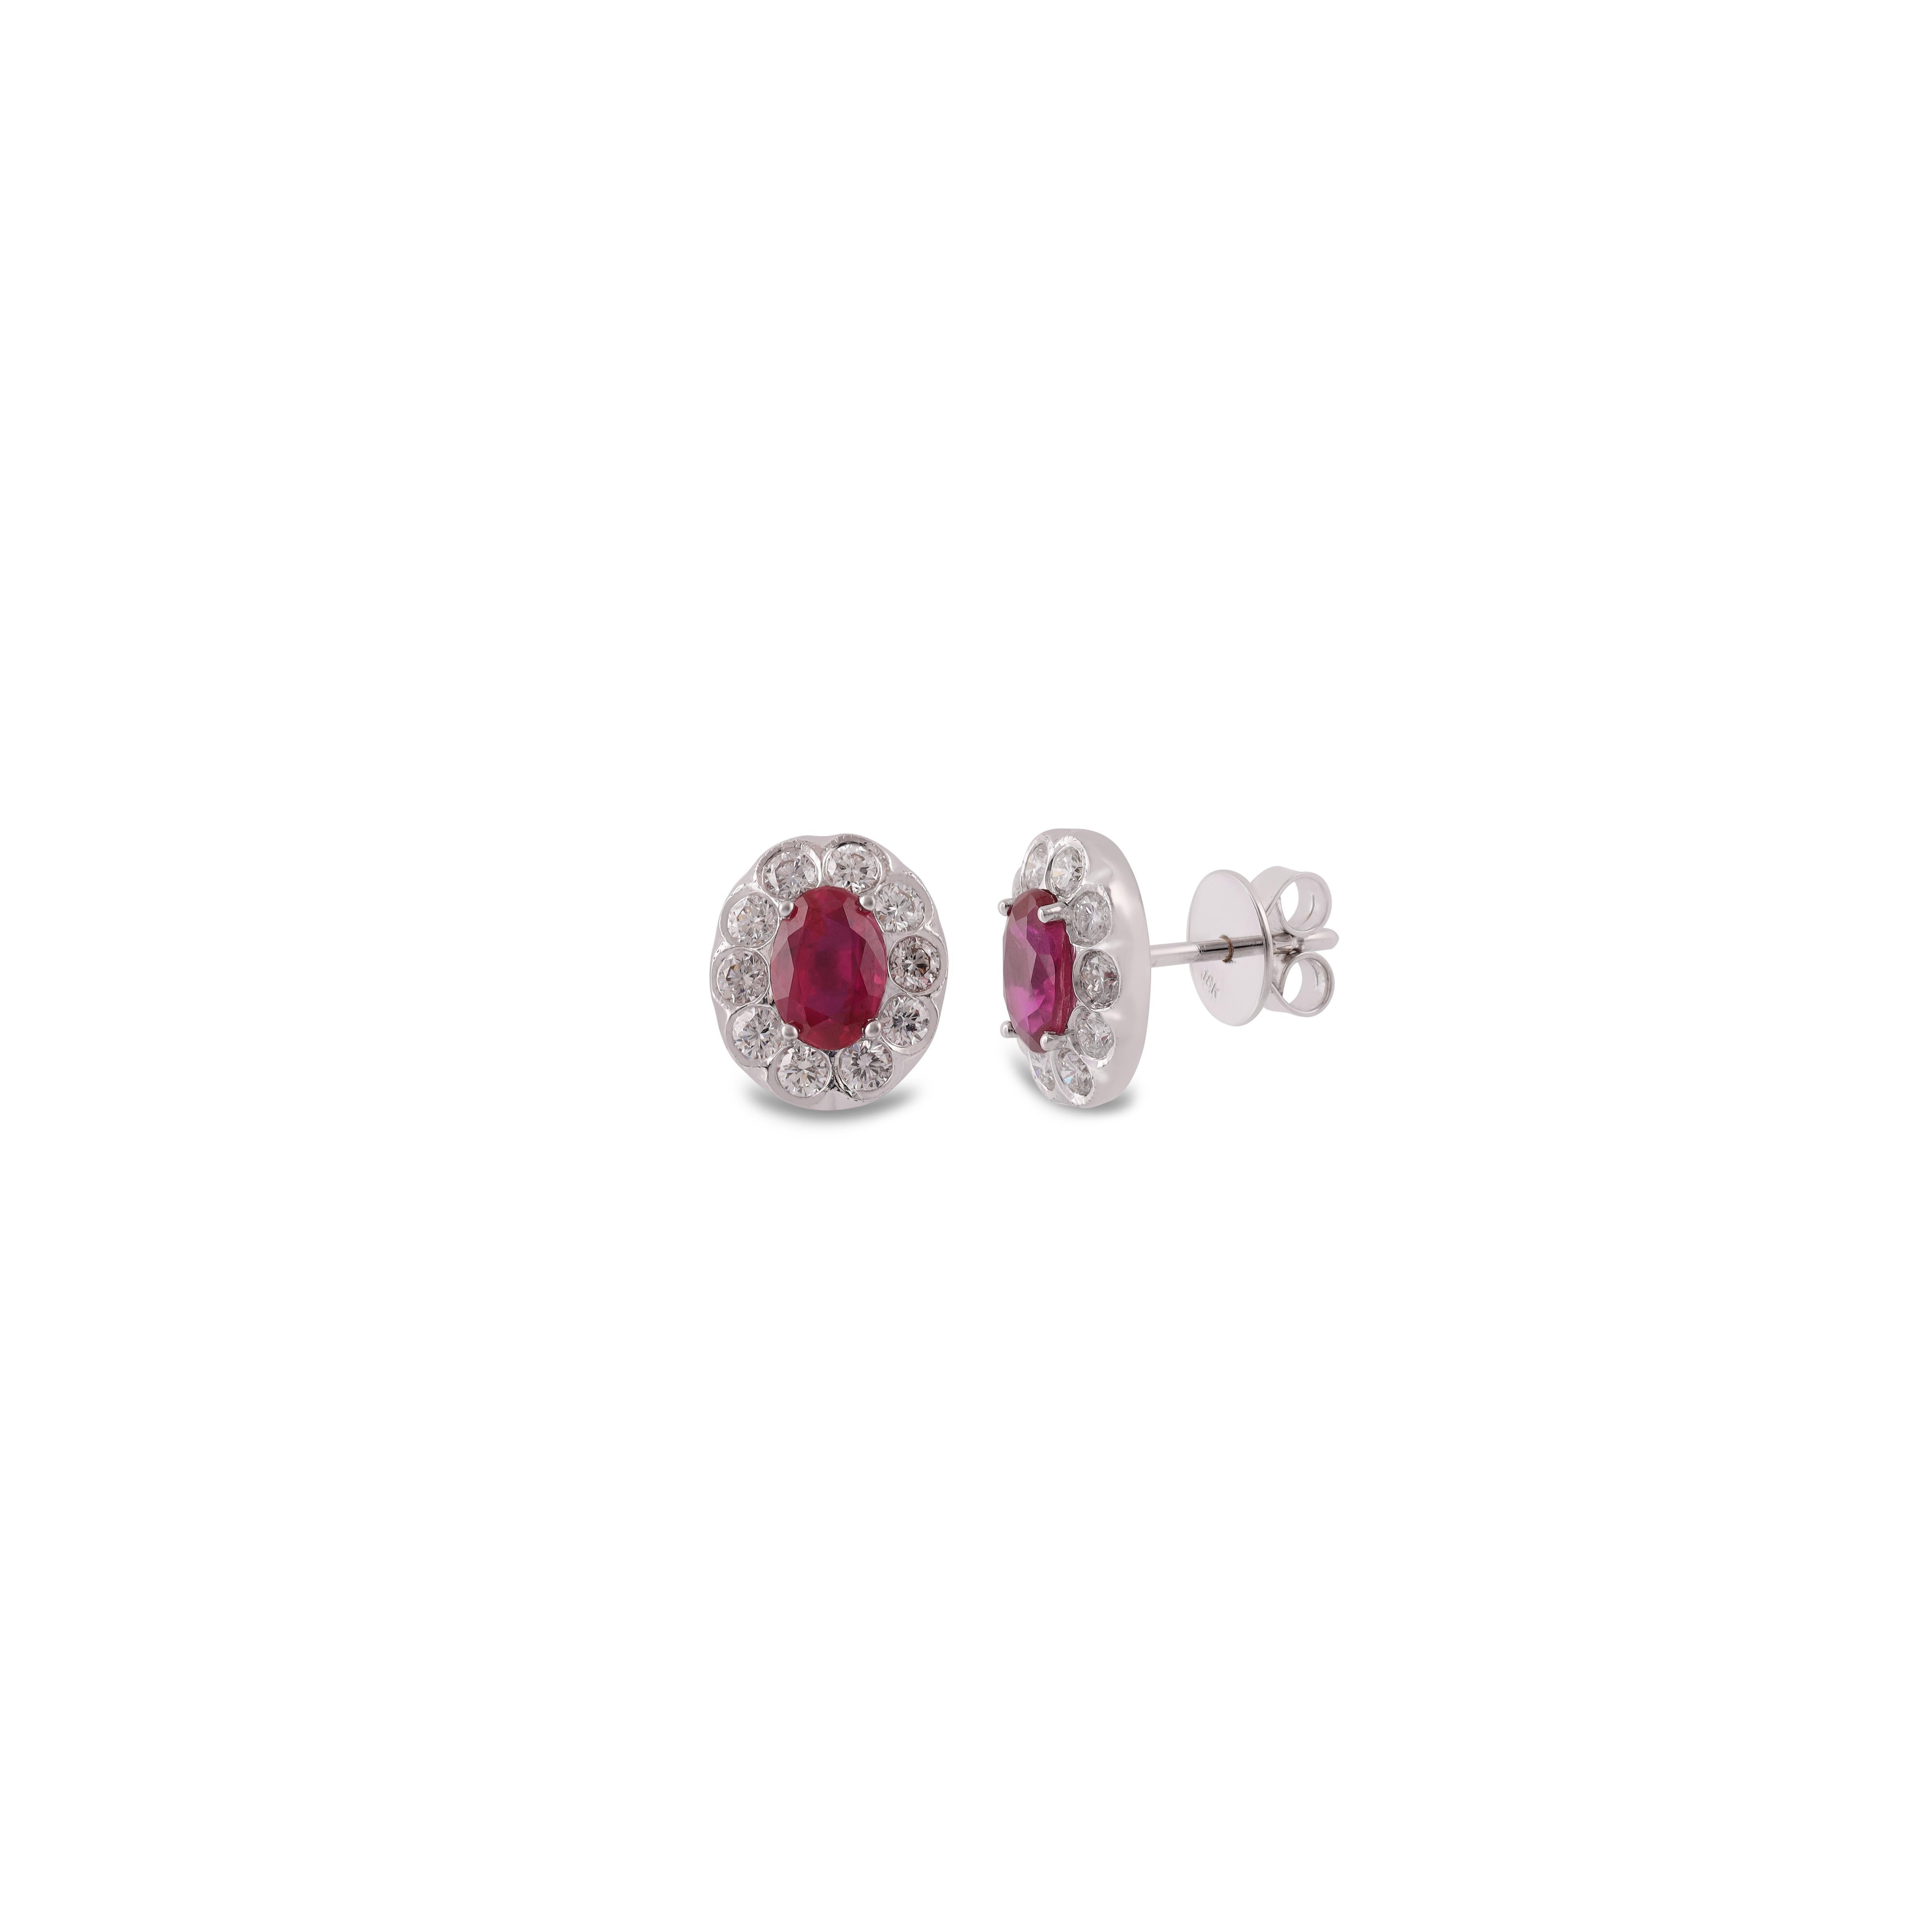 Modern 2.12 Carat Natural Mozambique Ruby & Diamond Earrings Studs in 18k White Gold . For Sale